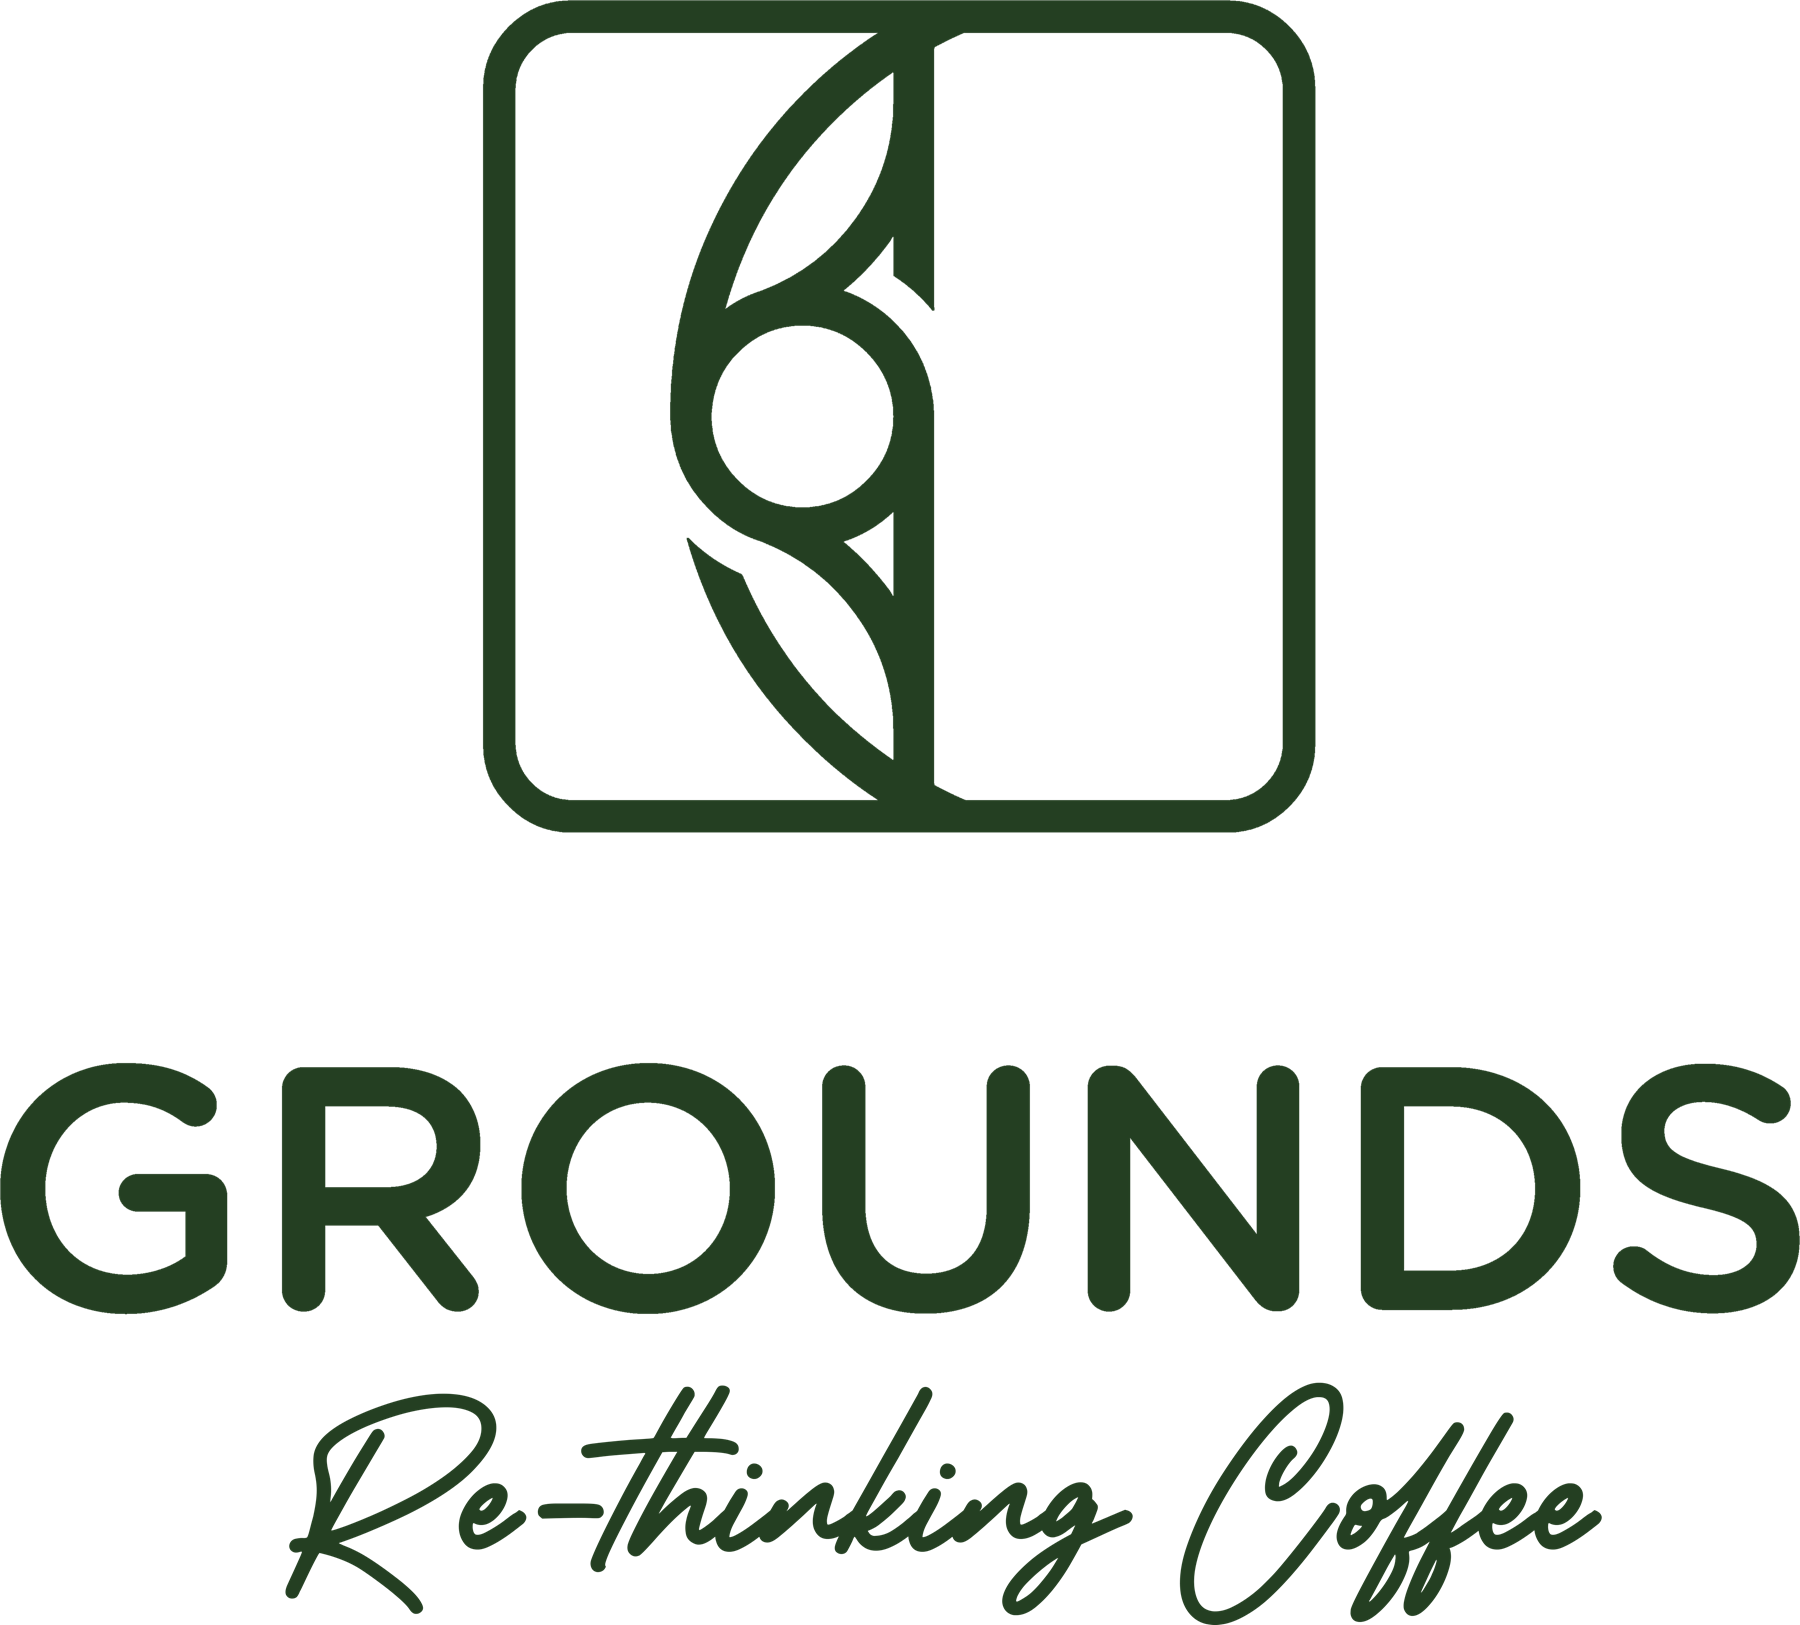 Grounds Coffees